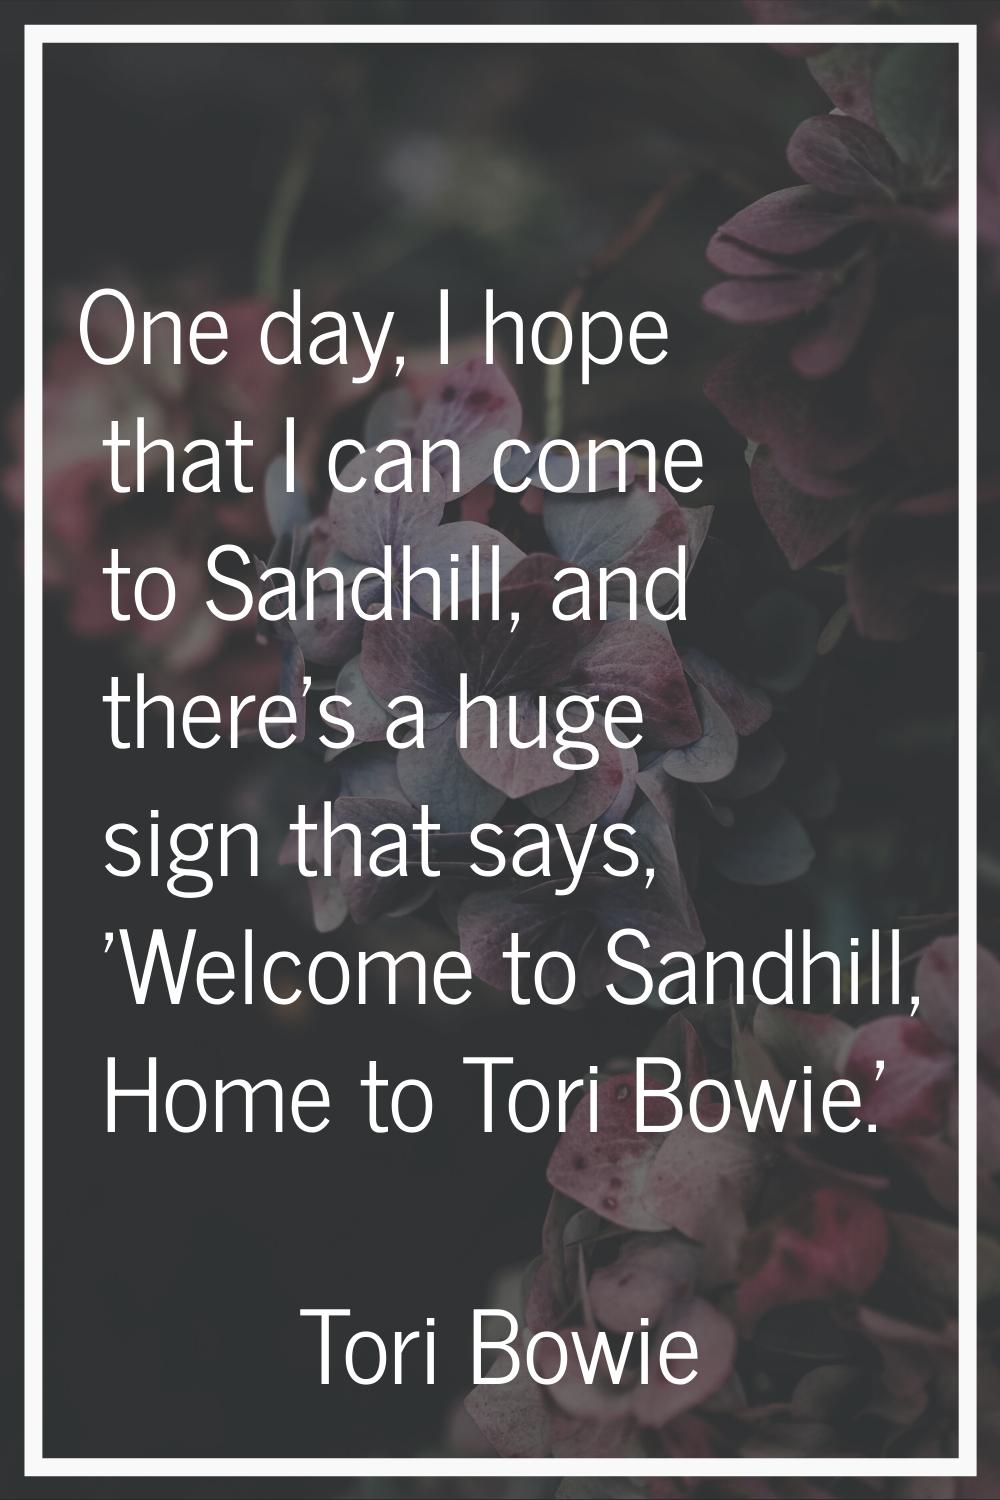 One day, I hope that I can come to Sandhill, and there's a huge sign that says, 'Welcome to Sandhil